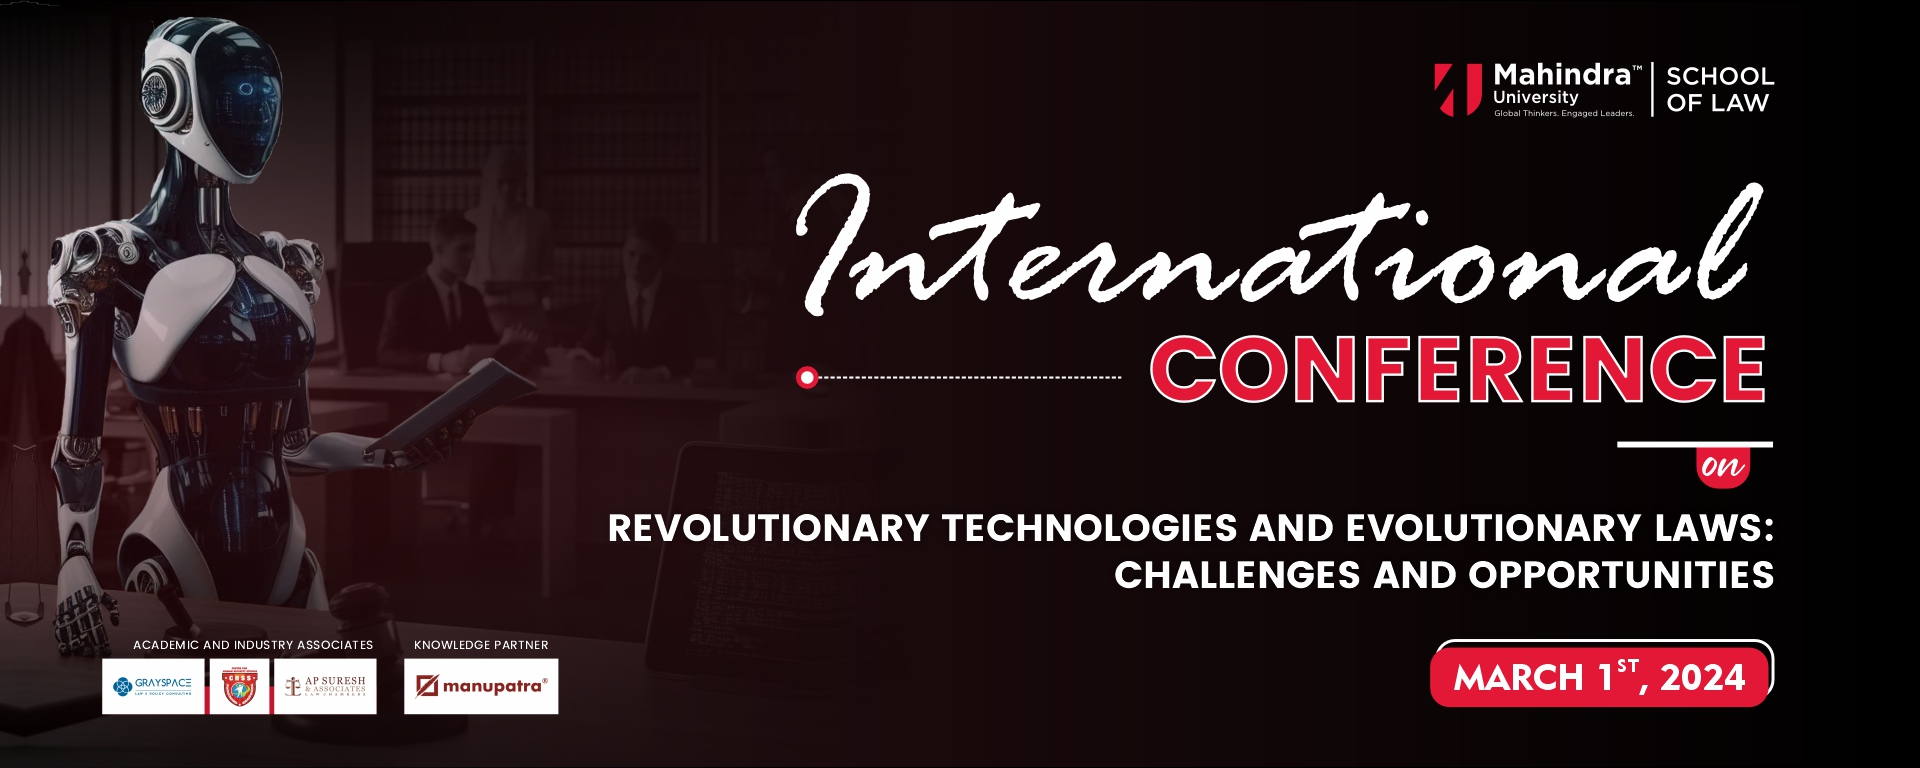 INTERNATIONAL LAW AND TECHNOLOGY CONFERENCE ON REVOLUTIONARY TECHNOLOGIES AND EVOLOUTIONARY LAWS CHALLENGES AND OPPORTUNITIES 1920x768